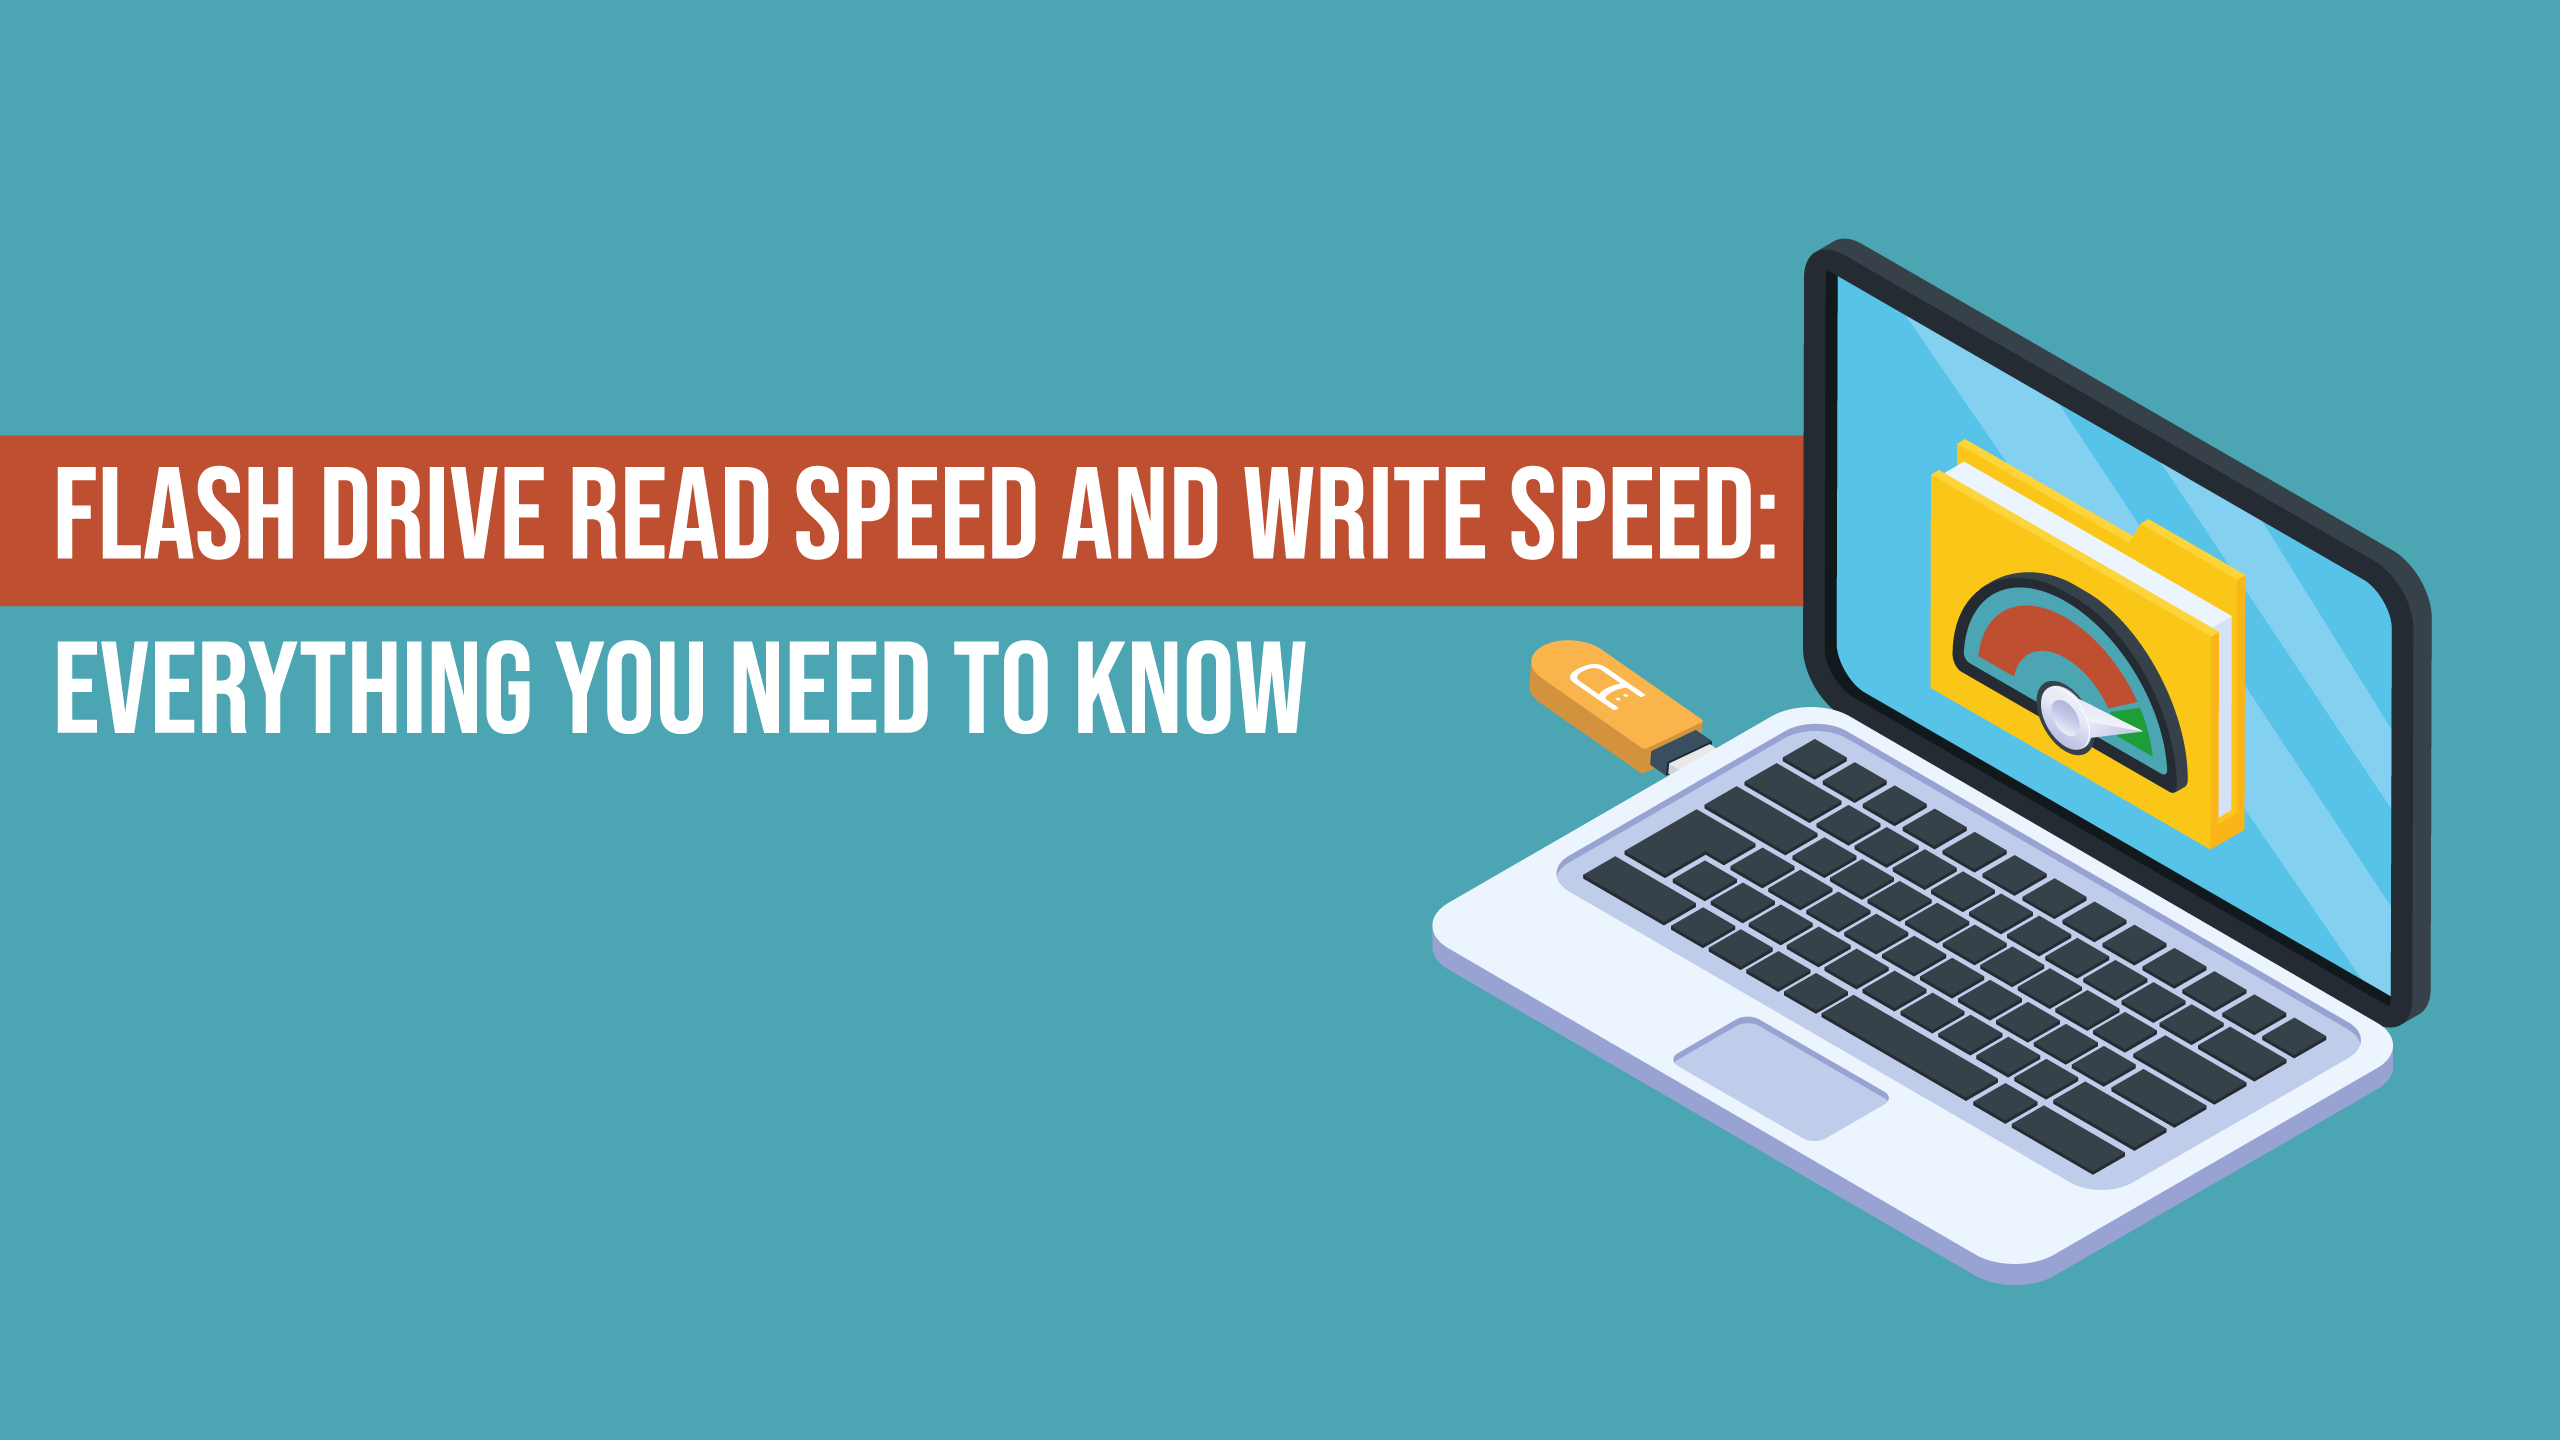 Flash Drive Read Speed Write Speed: You Need to Know